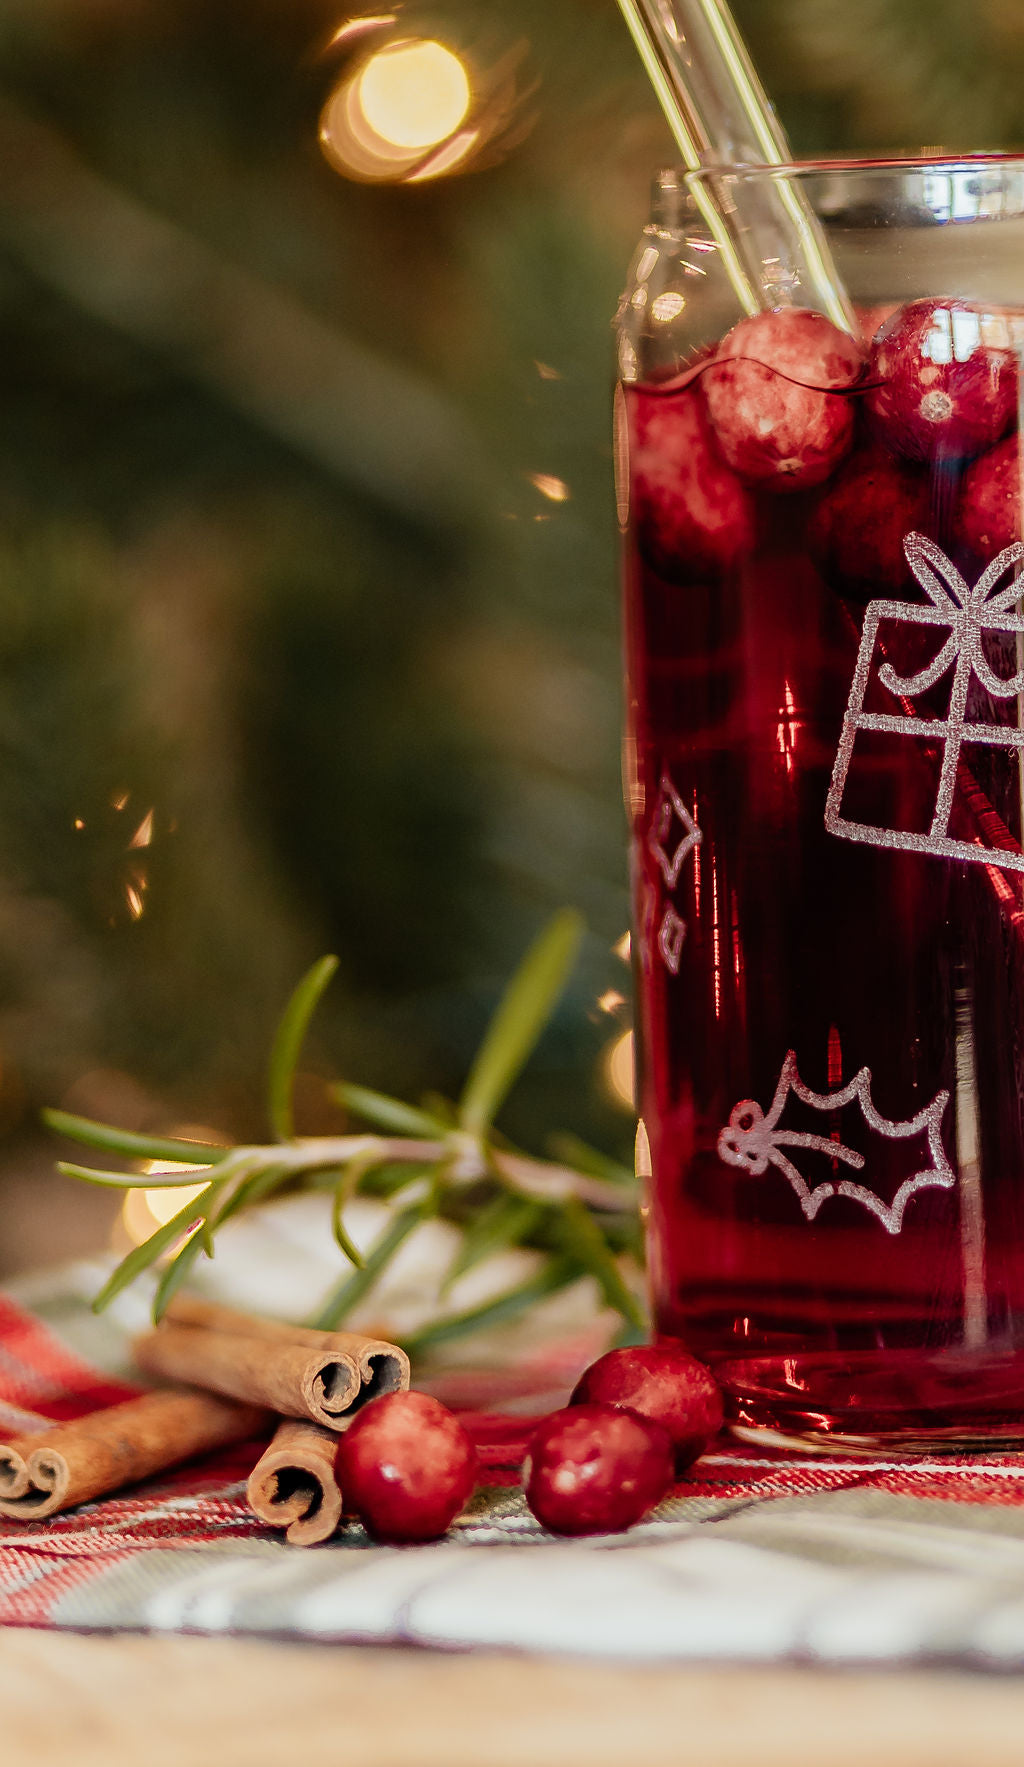 Holiday Drinking Glass | 16 oz.